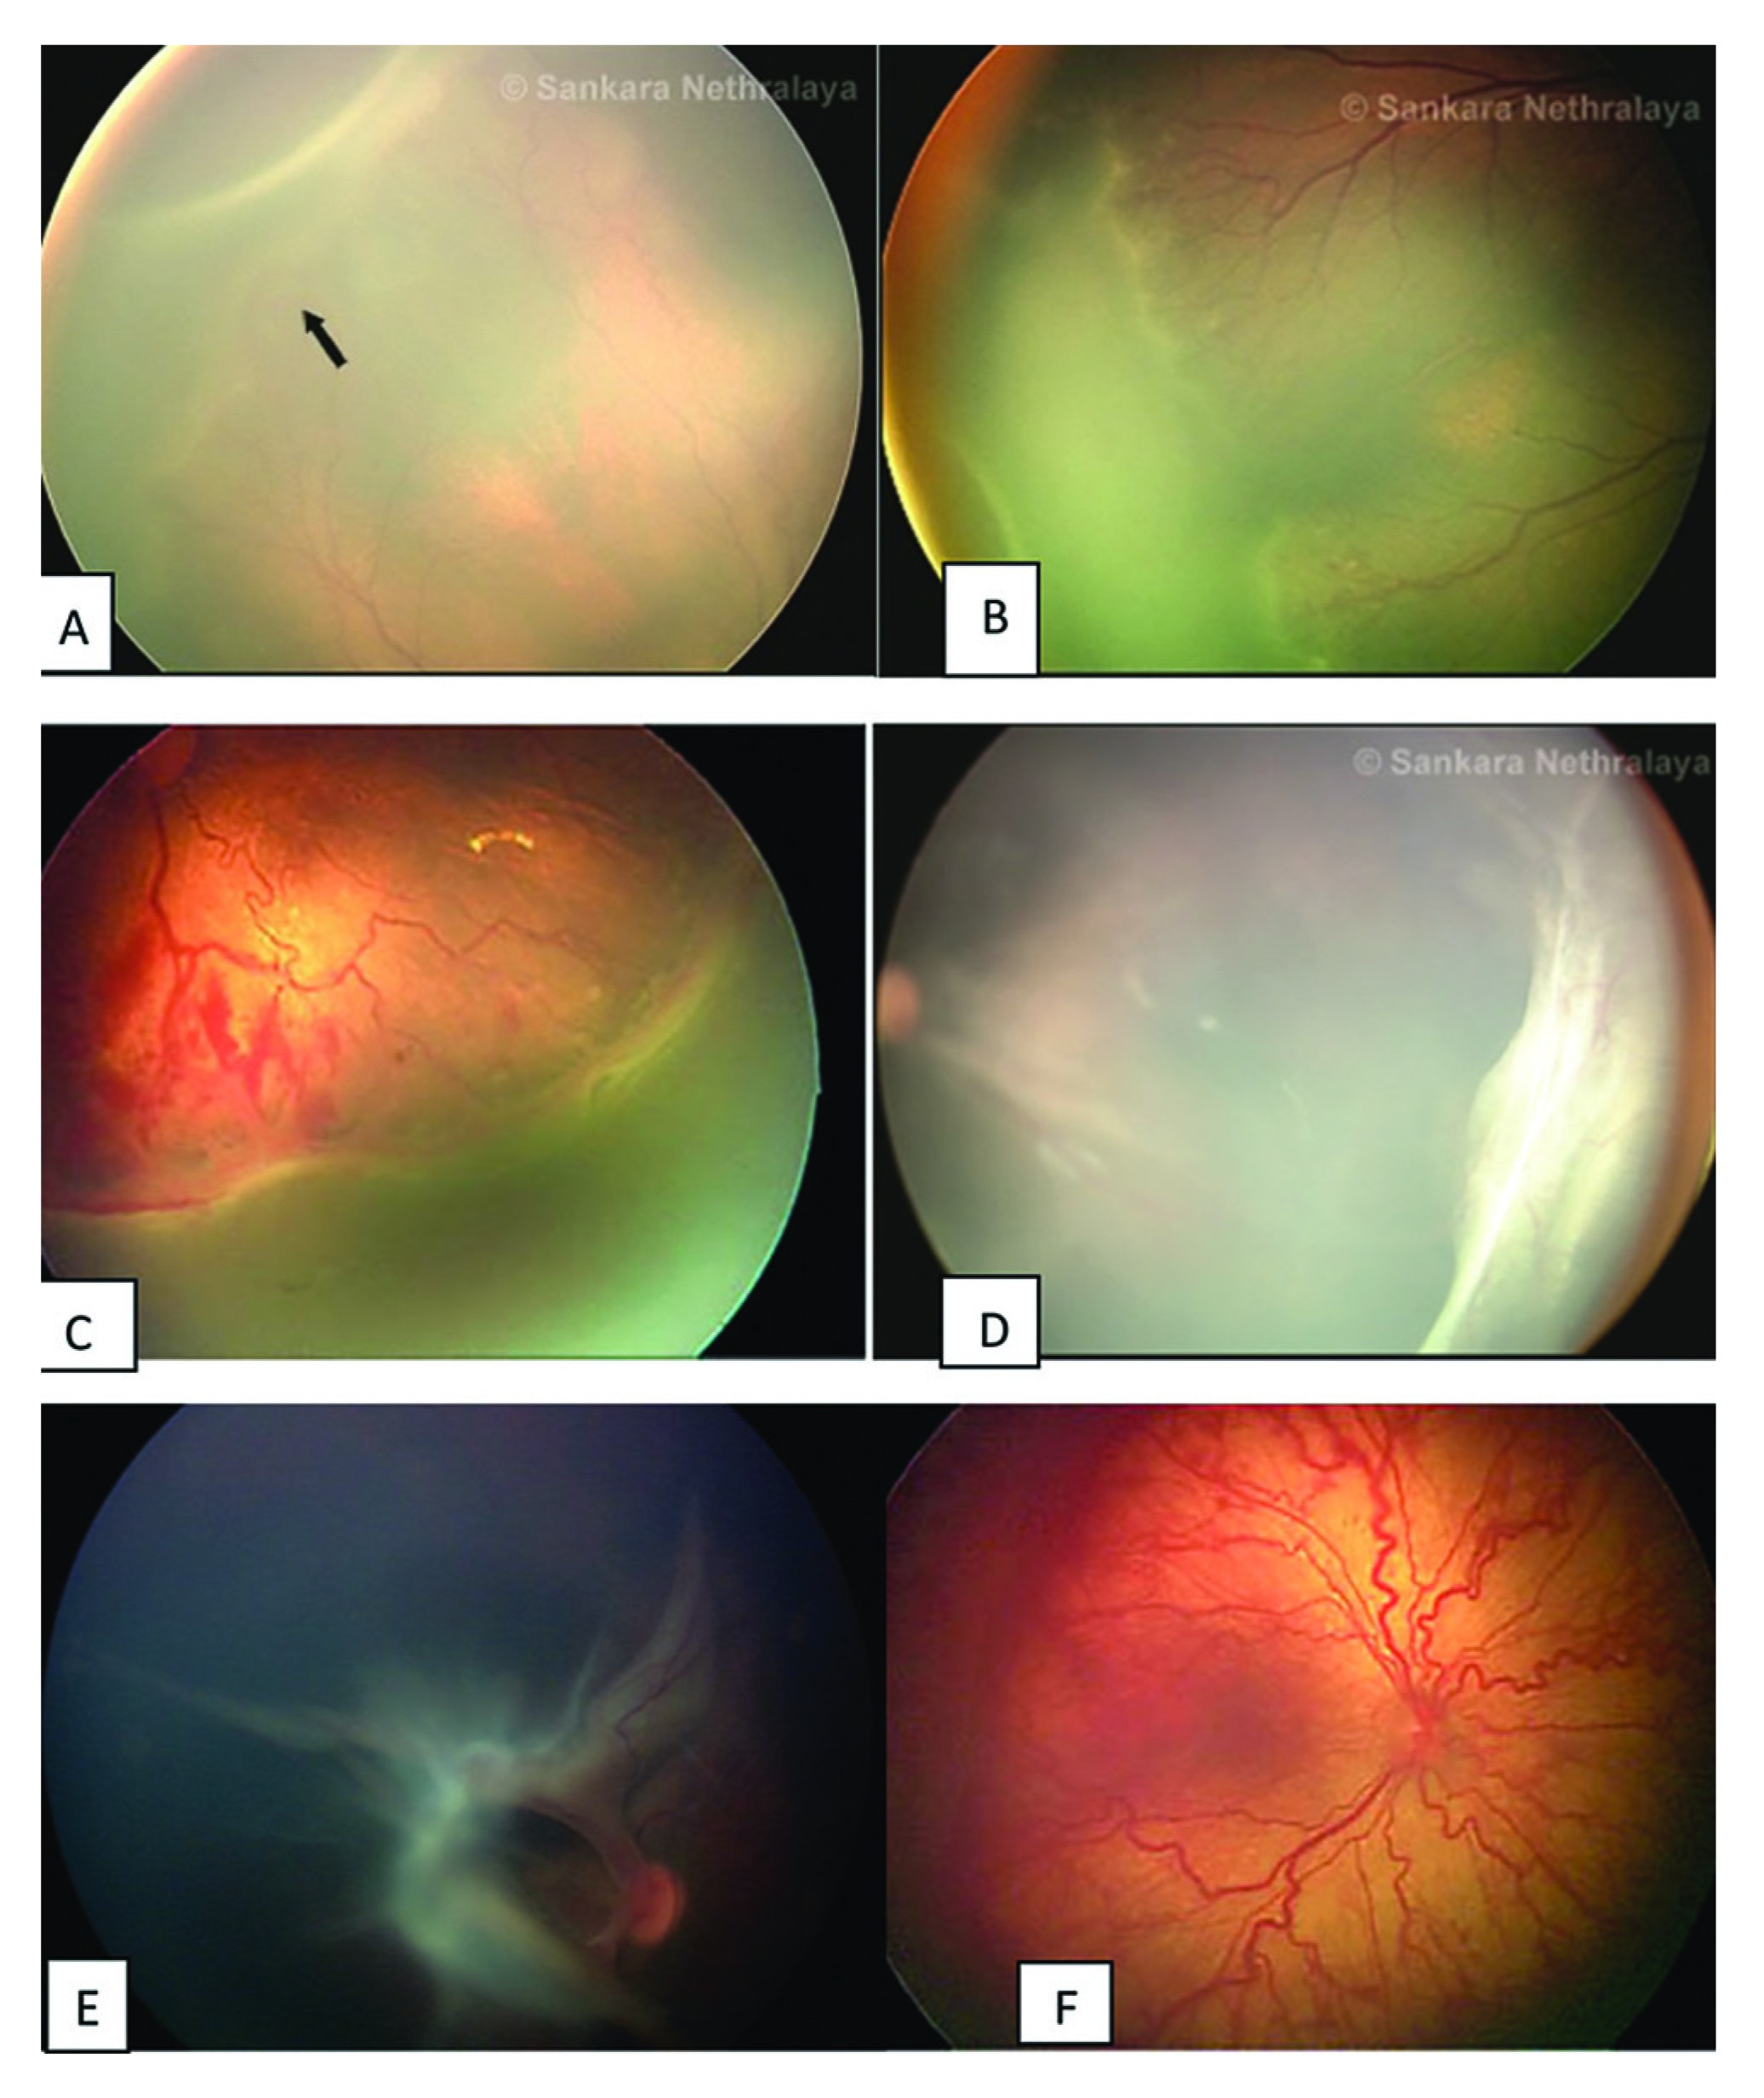 Figure 1. (A) Stage 1: Demarcation line. (B) Stage 2: Ridge. (C) Stage 3: Ridge with extraretinal fibrovascular proliferation. (D) Stage 4A: extrafoveal retinal detachment. (E) Stage 4B: fovea involving retinal detachment. (F) Plus disease with dilated and tortuous retinal vessels.  Reproduced with permission from Committee for the Classification of Retinopathy of Prematurity. An international classification of retinopaty of prematurity(2)